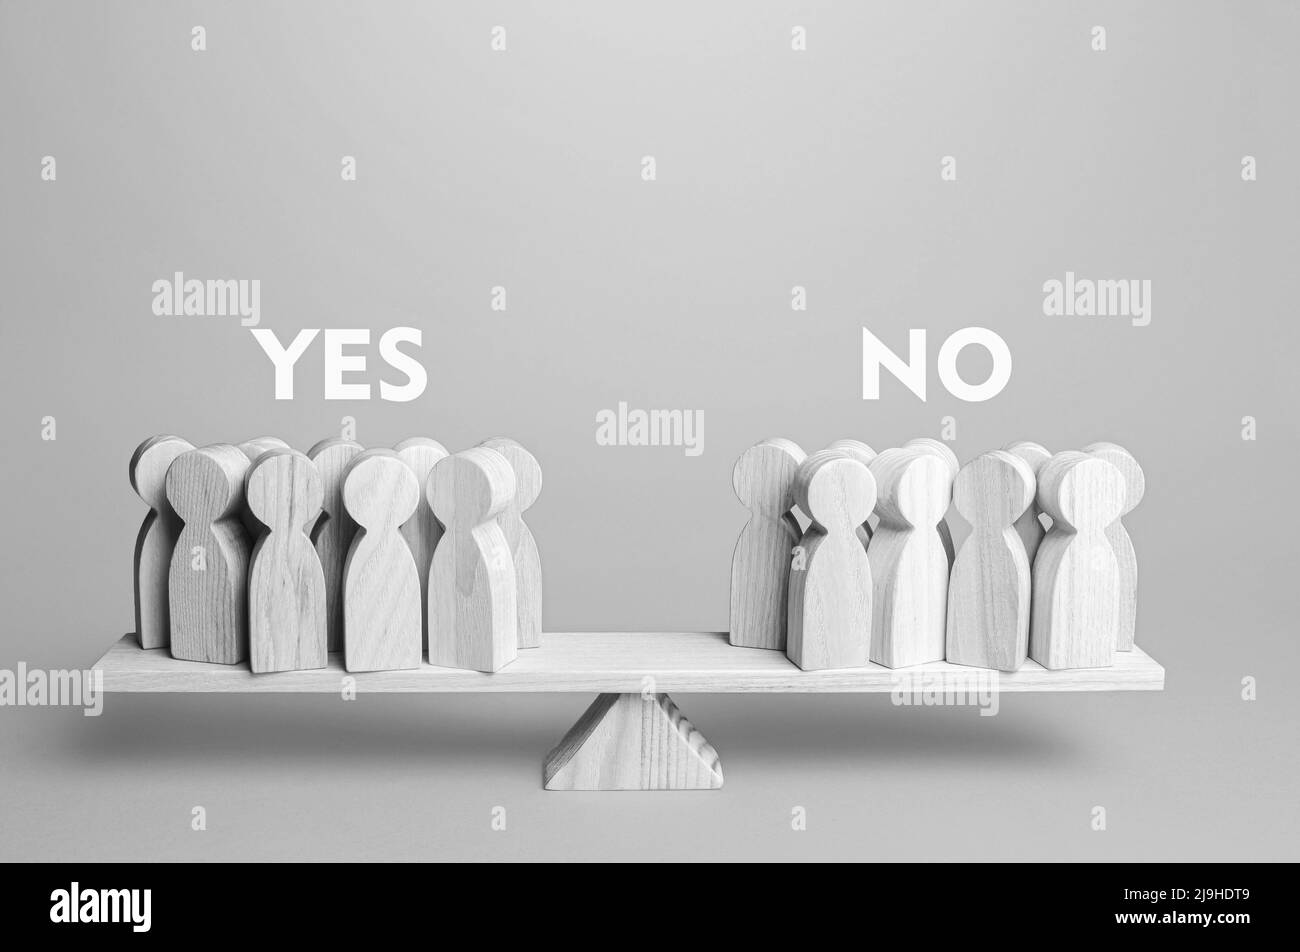 Voting yes or no. People are divided in opinion on the scales. Advantages and disadvantages. Political democratic elections. Divide into opposing fact Stock Photo